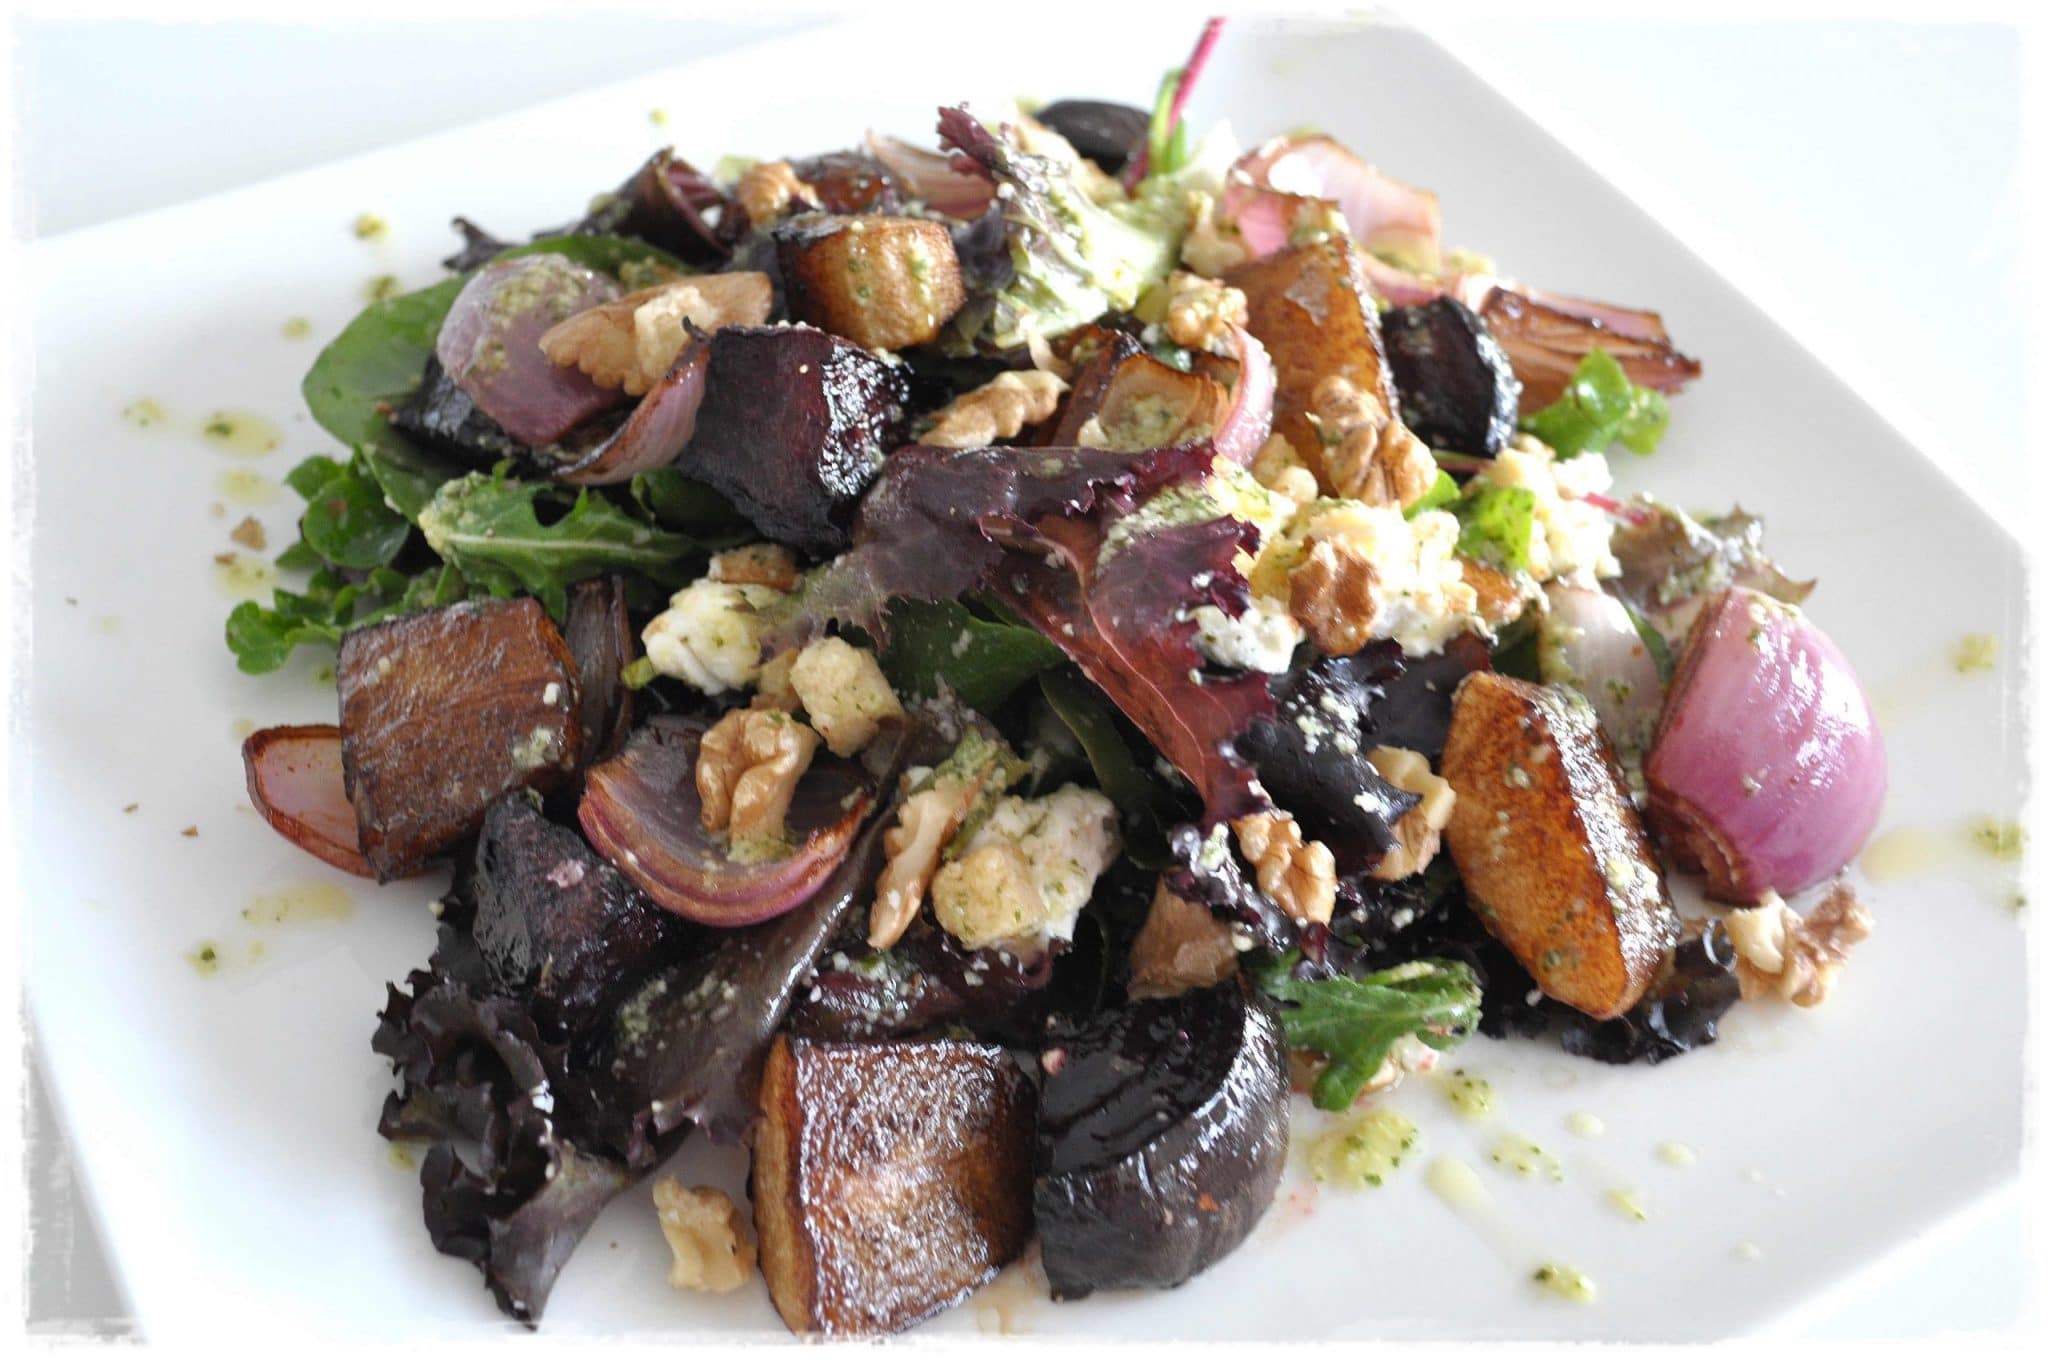 Roasted Beetroot, Pear & Goat’s Cheese Salad With Basil Pesto Dressing